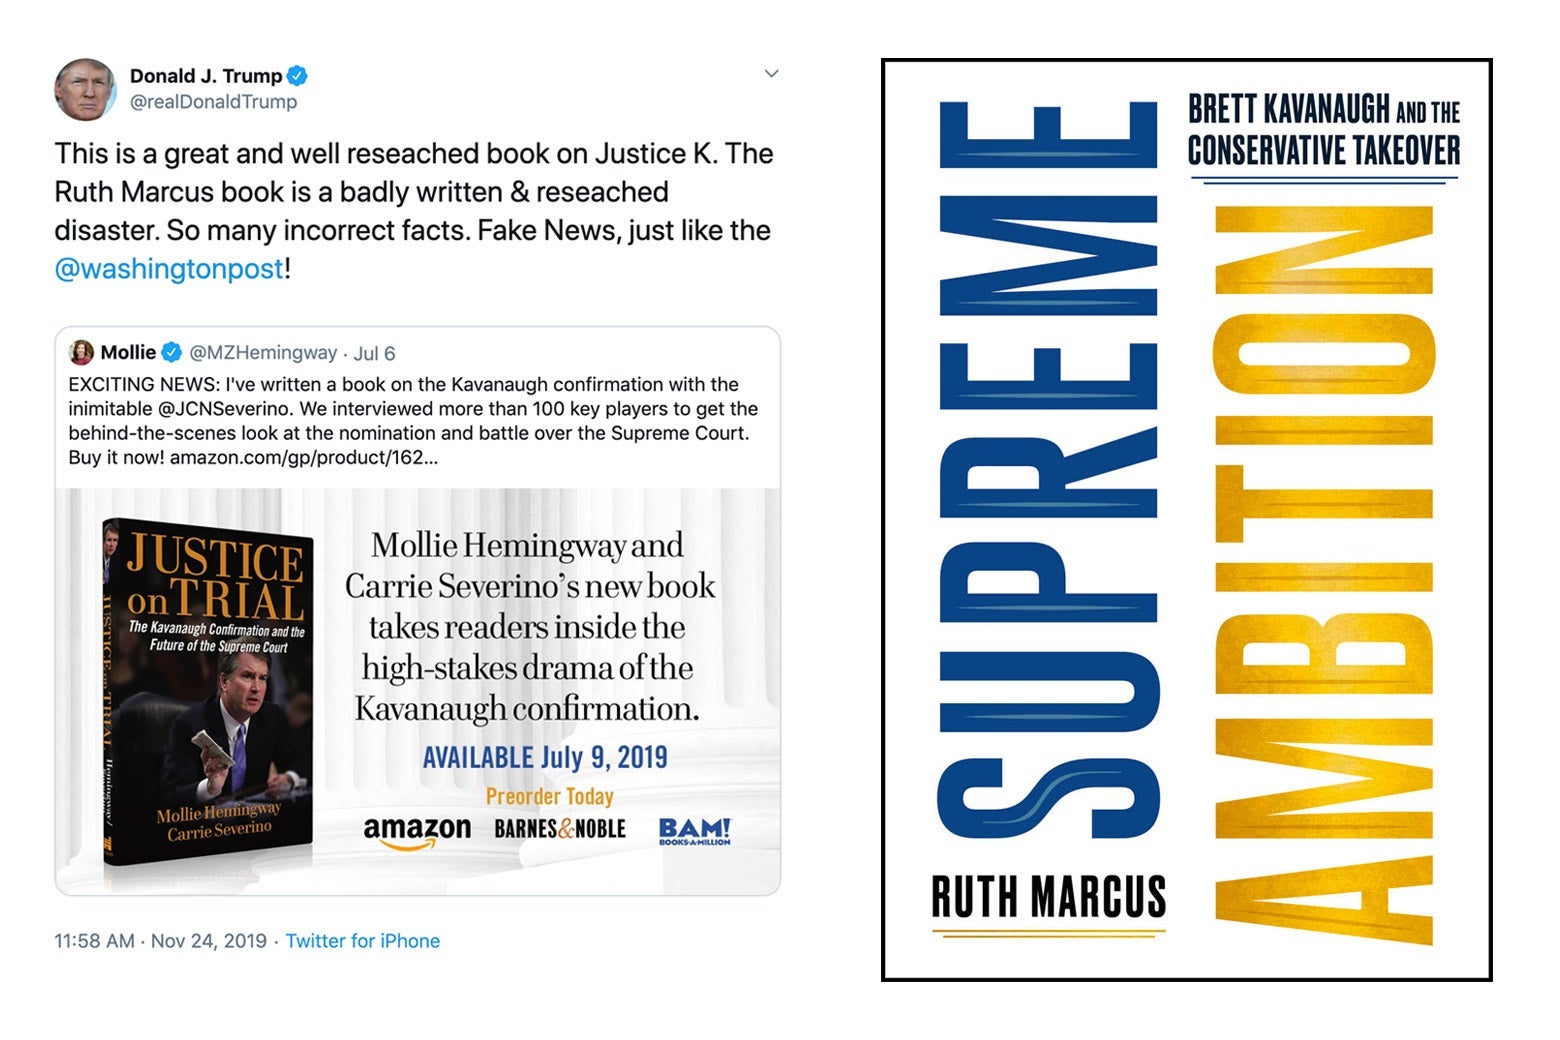 Donald Trump’s tweet about Ruth Marcus’ book and the cover of her book.